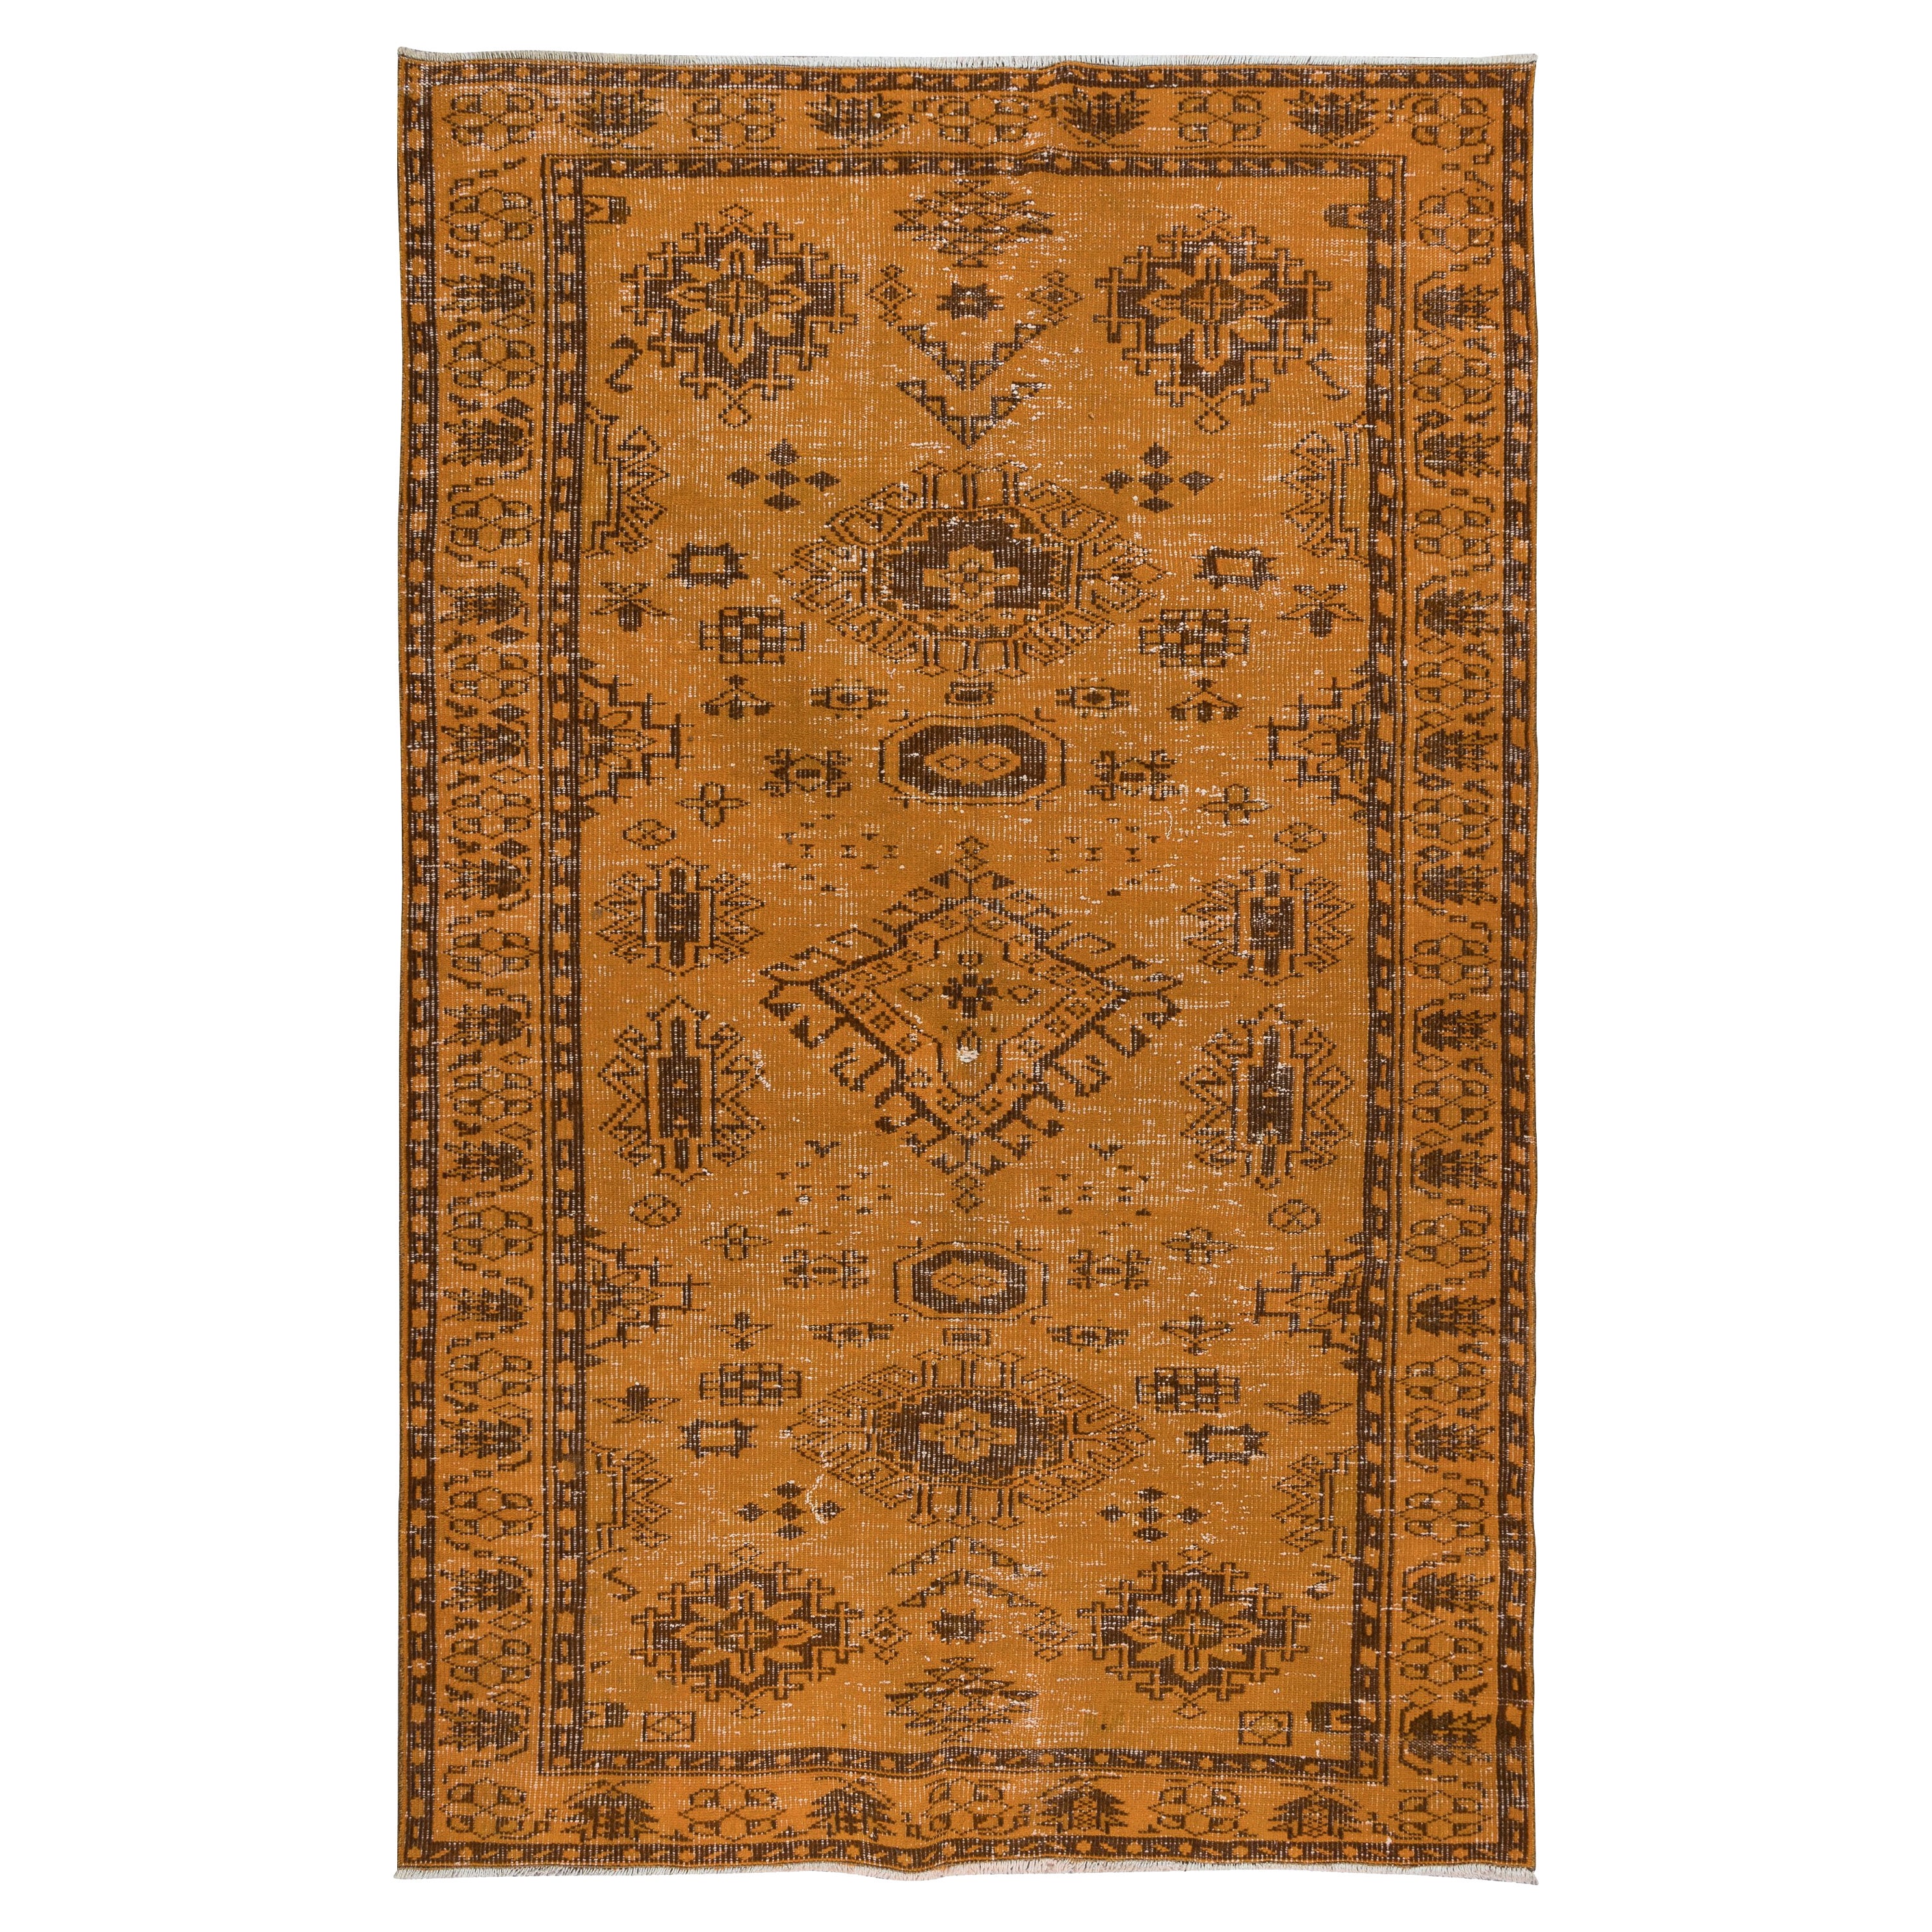 5.5x8.5 Ft Orange Handmade Turkish Area Rug with Medallions and Flower Motifs For Sale